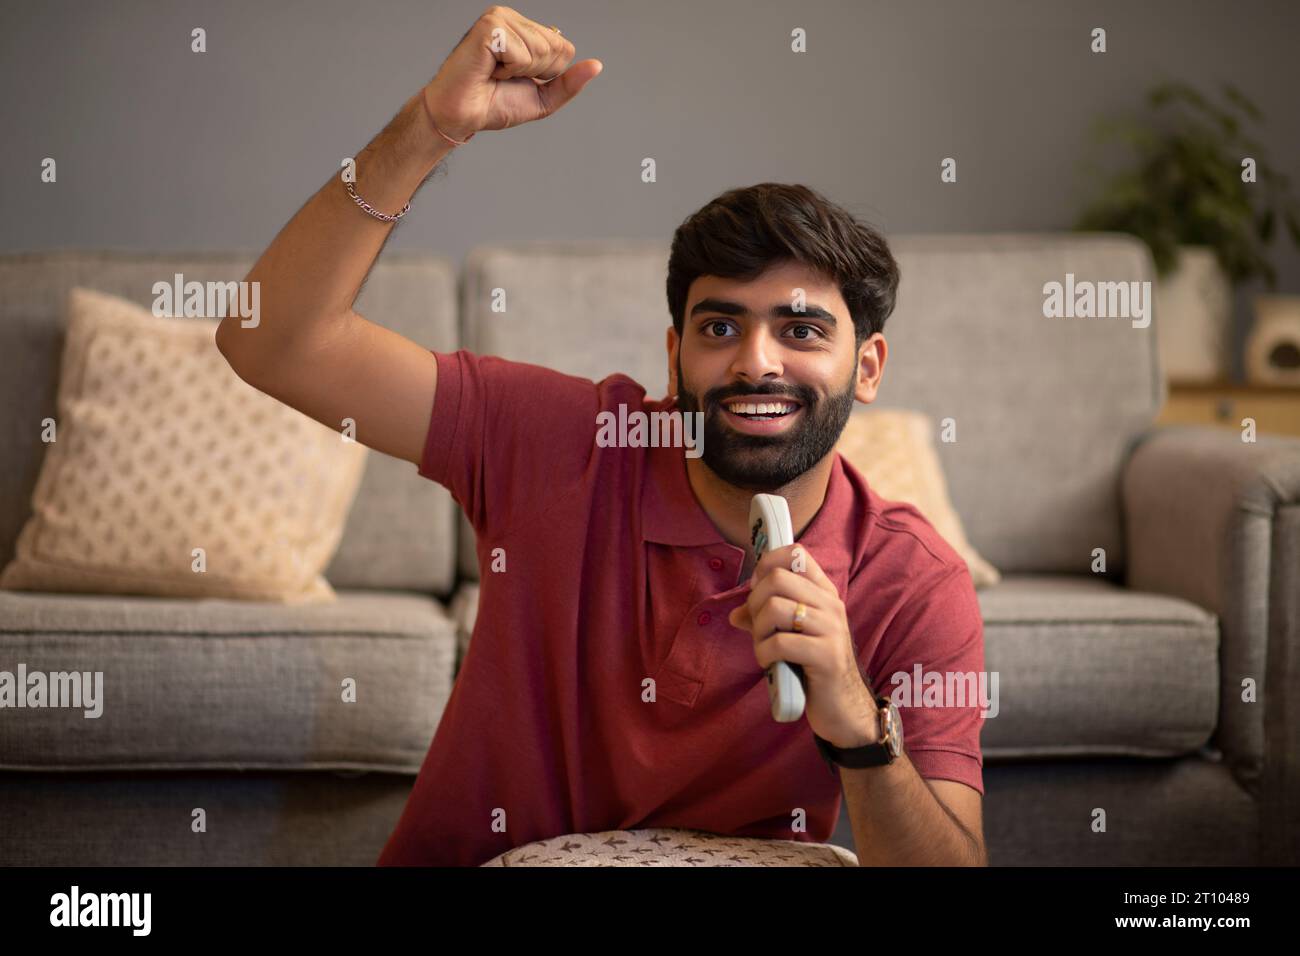 Portrait of excited young man cheering while watching TV in living room Stock Photo